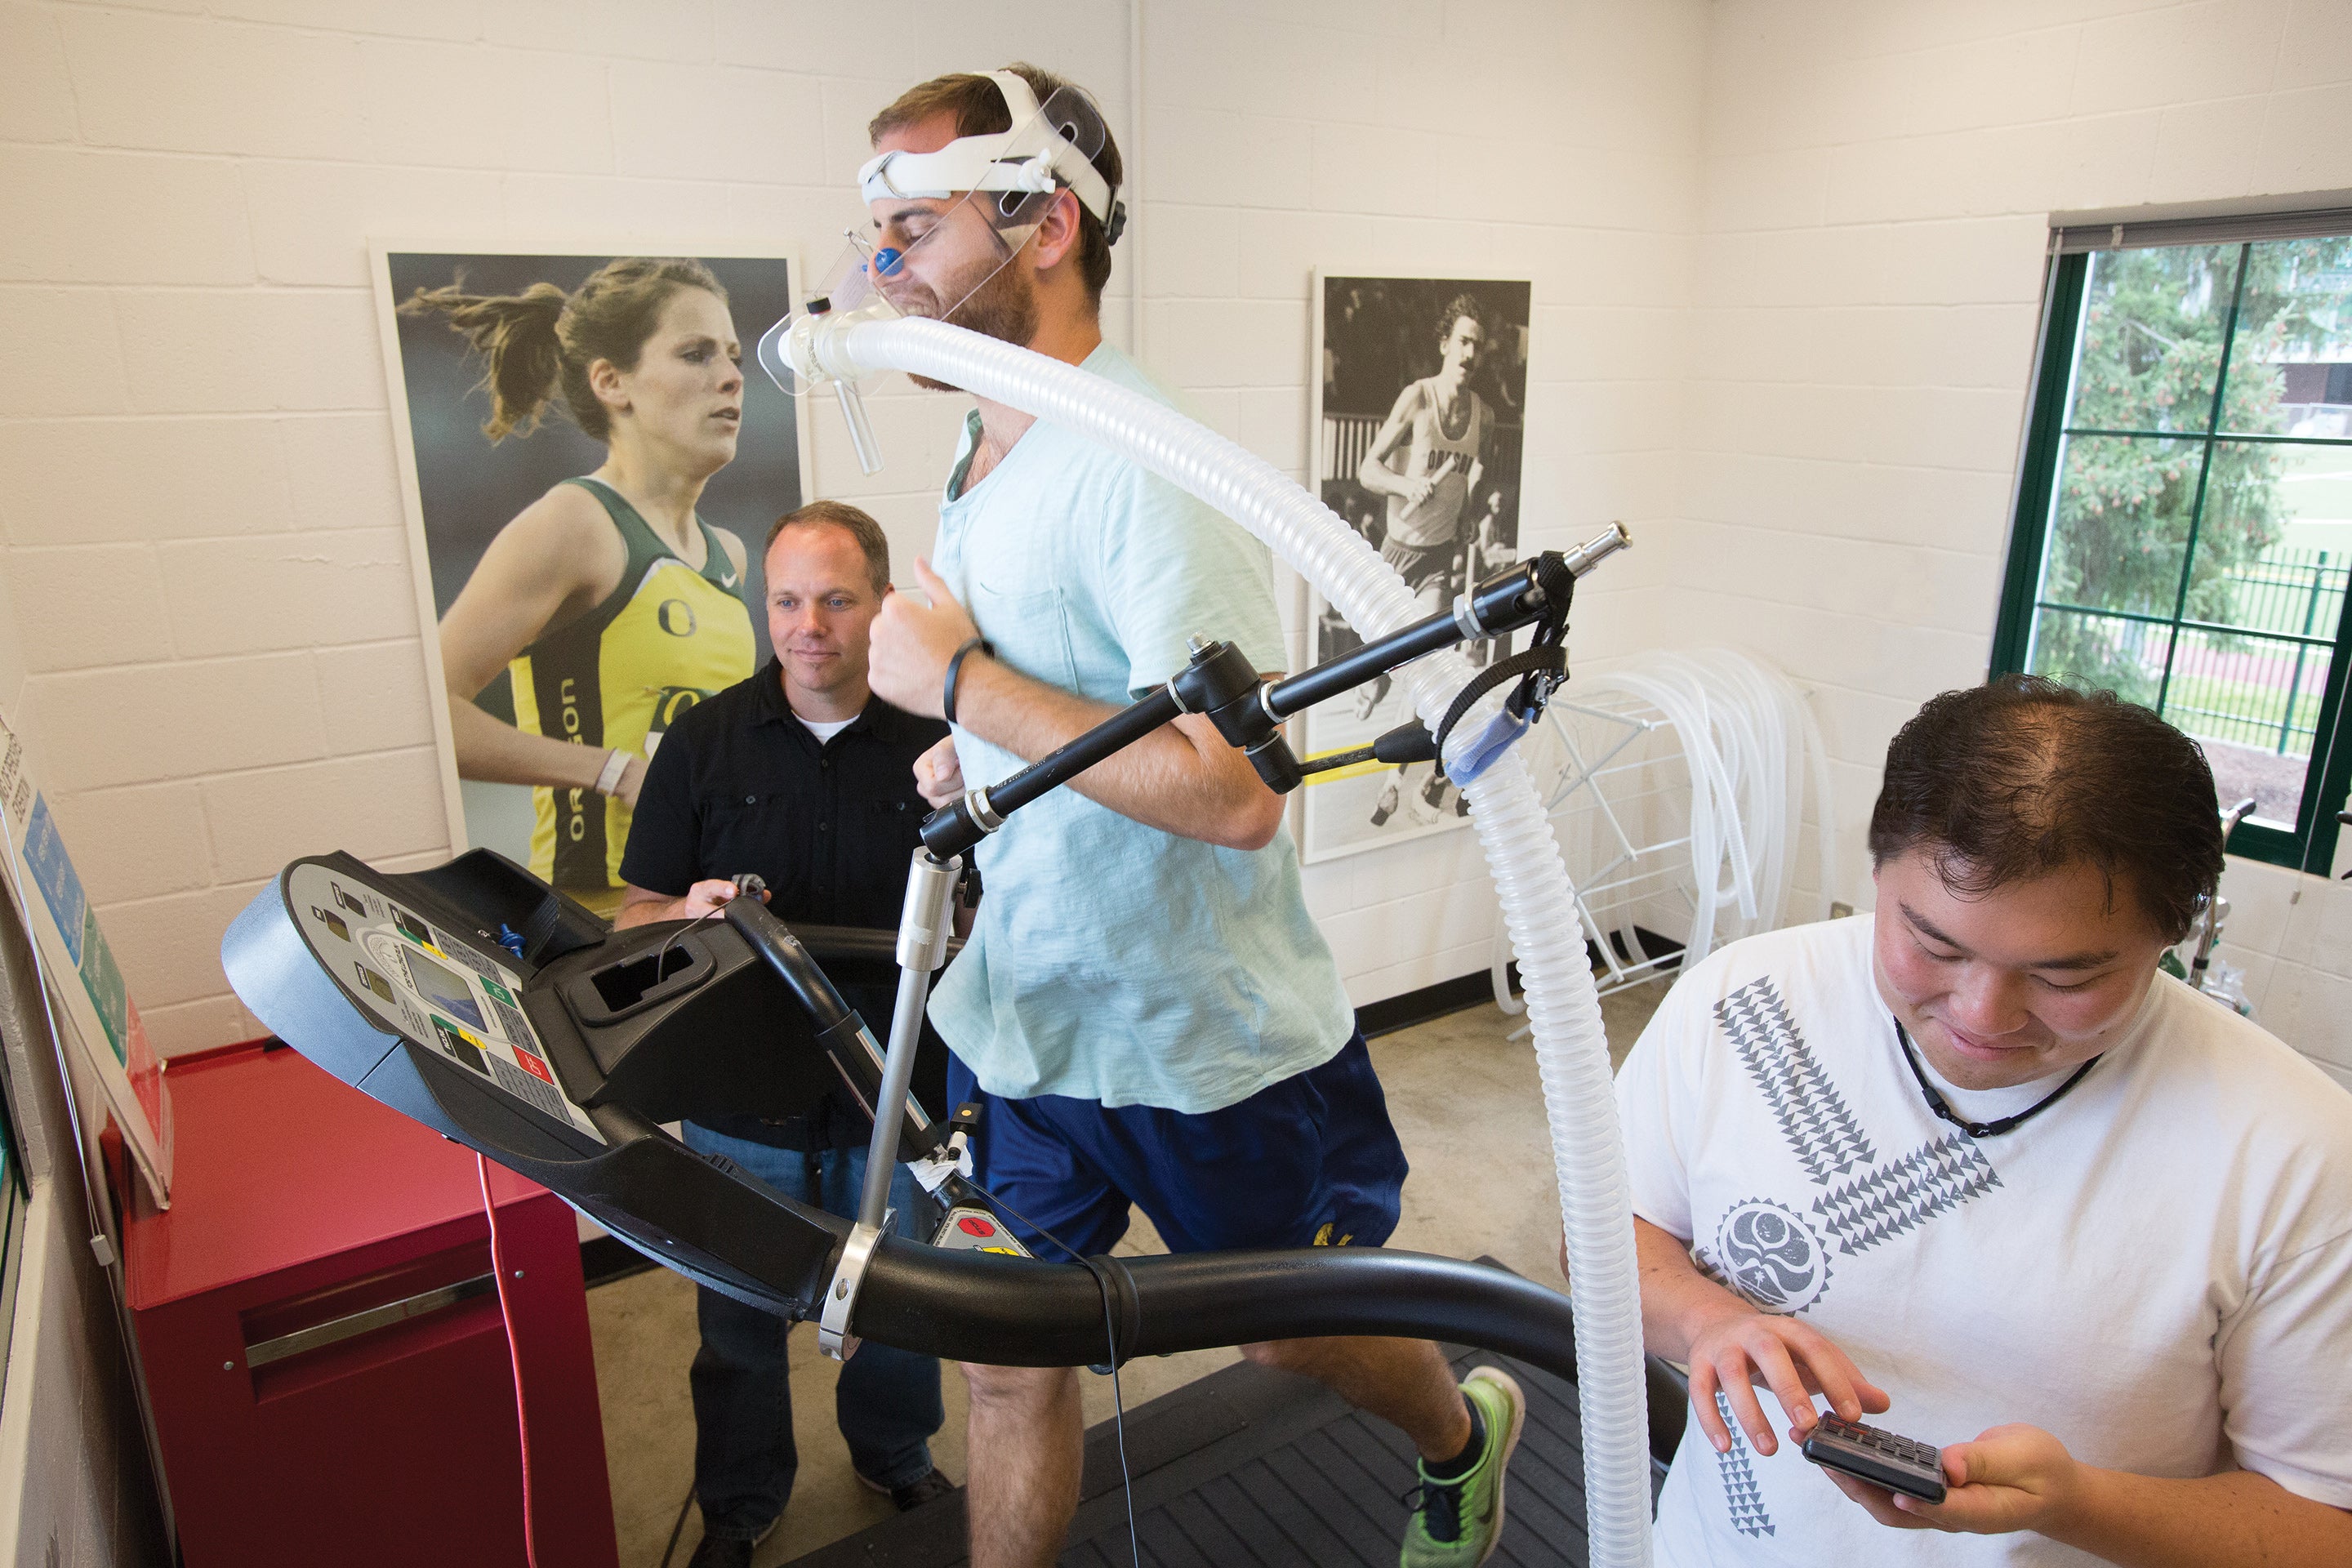 Athlete wearing a mask attached to a hose running on a treadmill with two people monitoring instruments